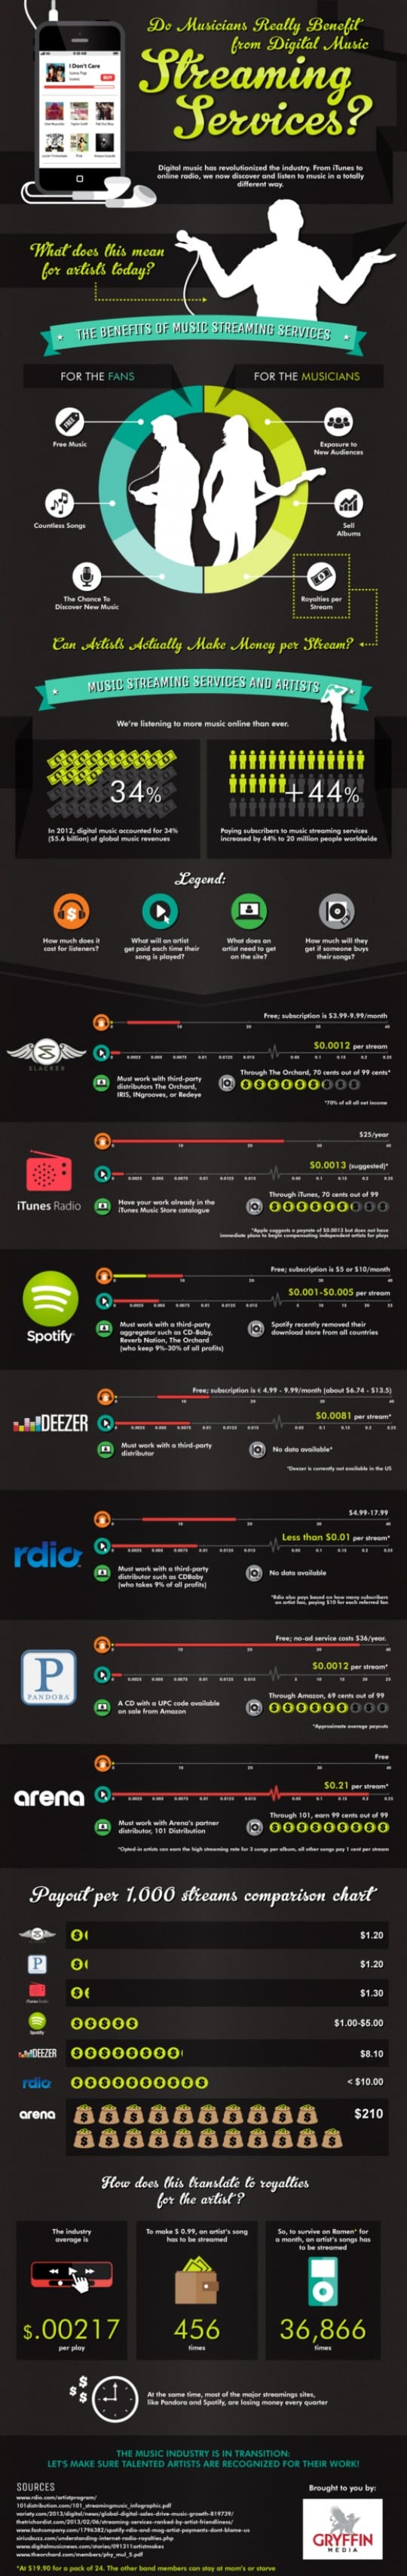 How Much Do Musicians Really Benefit from Streaming Music Services